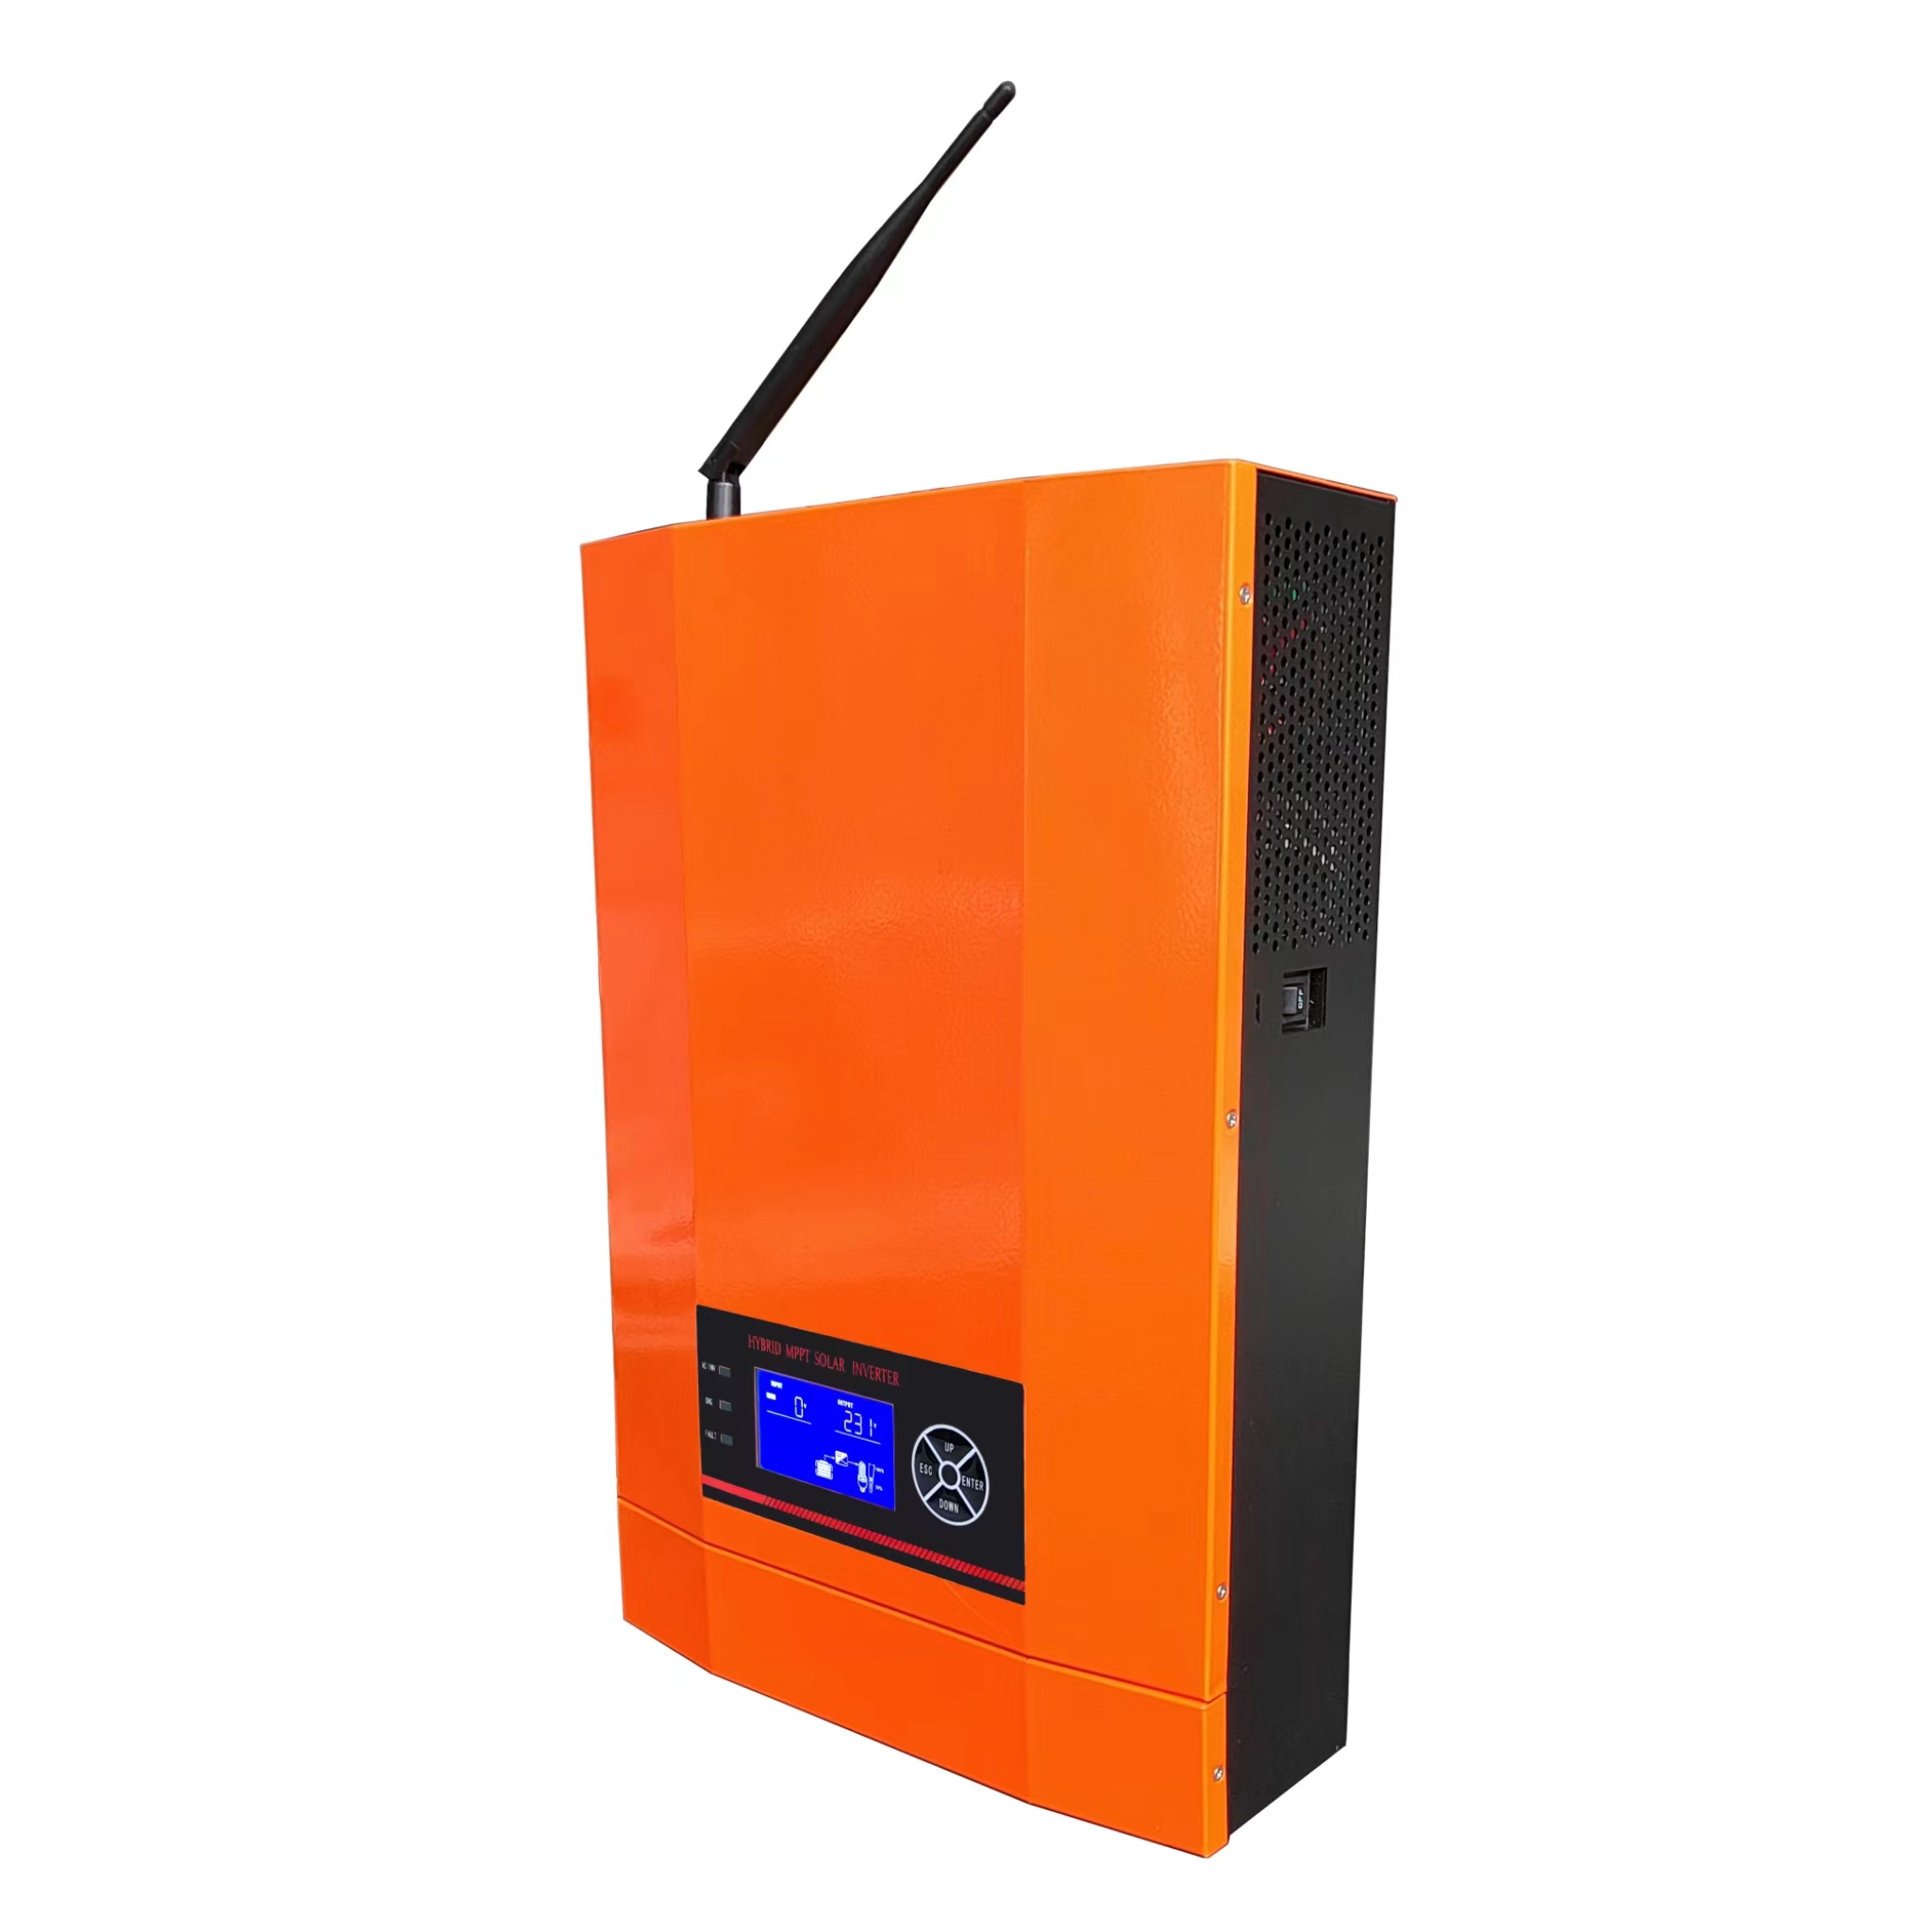 MPPT 5500w solar energy hybrid high frequency pure sine wave inverter and charger with WIFI Monitor for wild camping